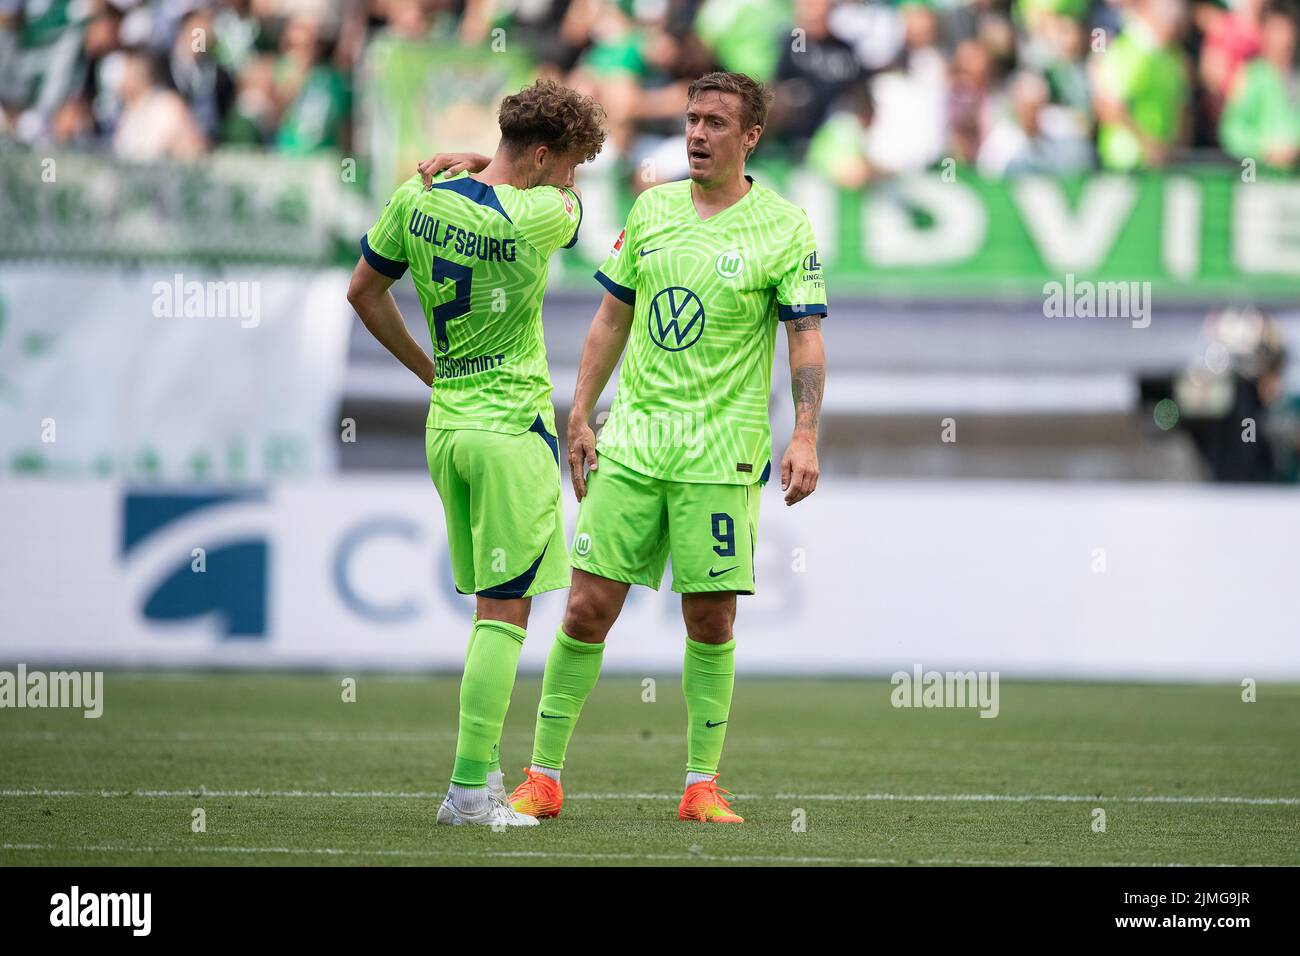 Wolfsburg, Germany. 06th Aug, 2022. Soccer, Bundesliga, VfL Wolfsburg - SV Werder Bremen, Matchday 1, Volkswagen Arena. Wolfsburg's Max Kruse (r) and Wolfsburg's Luca Waldschmidt stand on the field after the match. Credit: Swen Pförtner/dpa - IMPORTANT NOTE: In accordance with the requirements of the DFL Deutsche Fußball Liga and the DFB Deutscher Fußball-Bund, it is prohibited to use or have used photographs taken in the stadium and/or of the match in the form of sequence pictures and/or video-like photo series./dpa/Alamy Live News Stock Photo